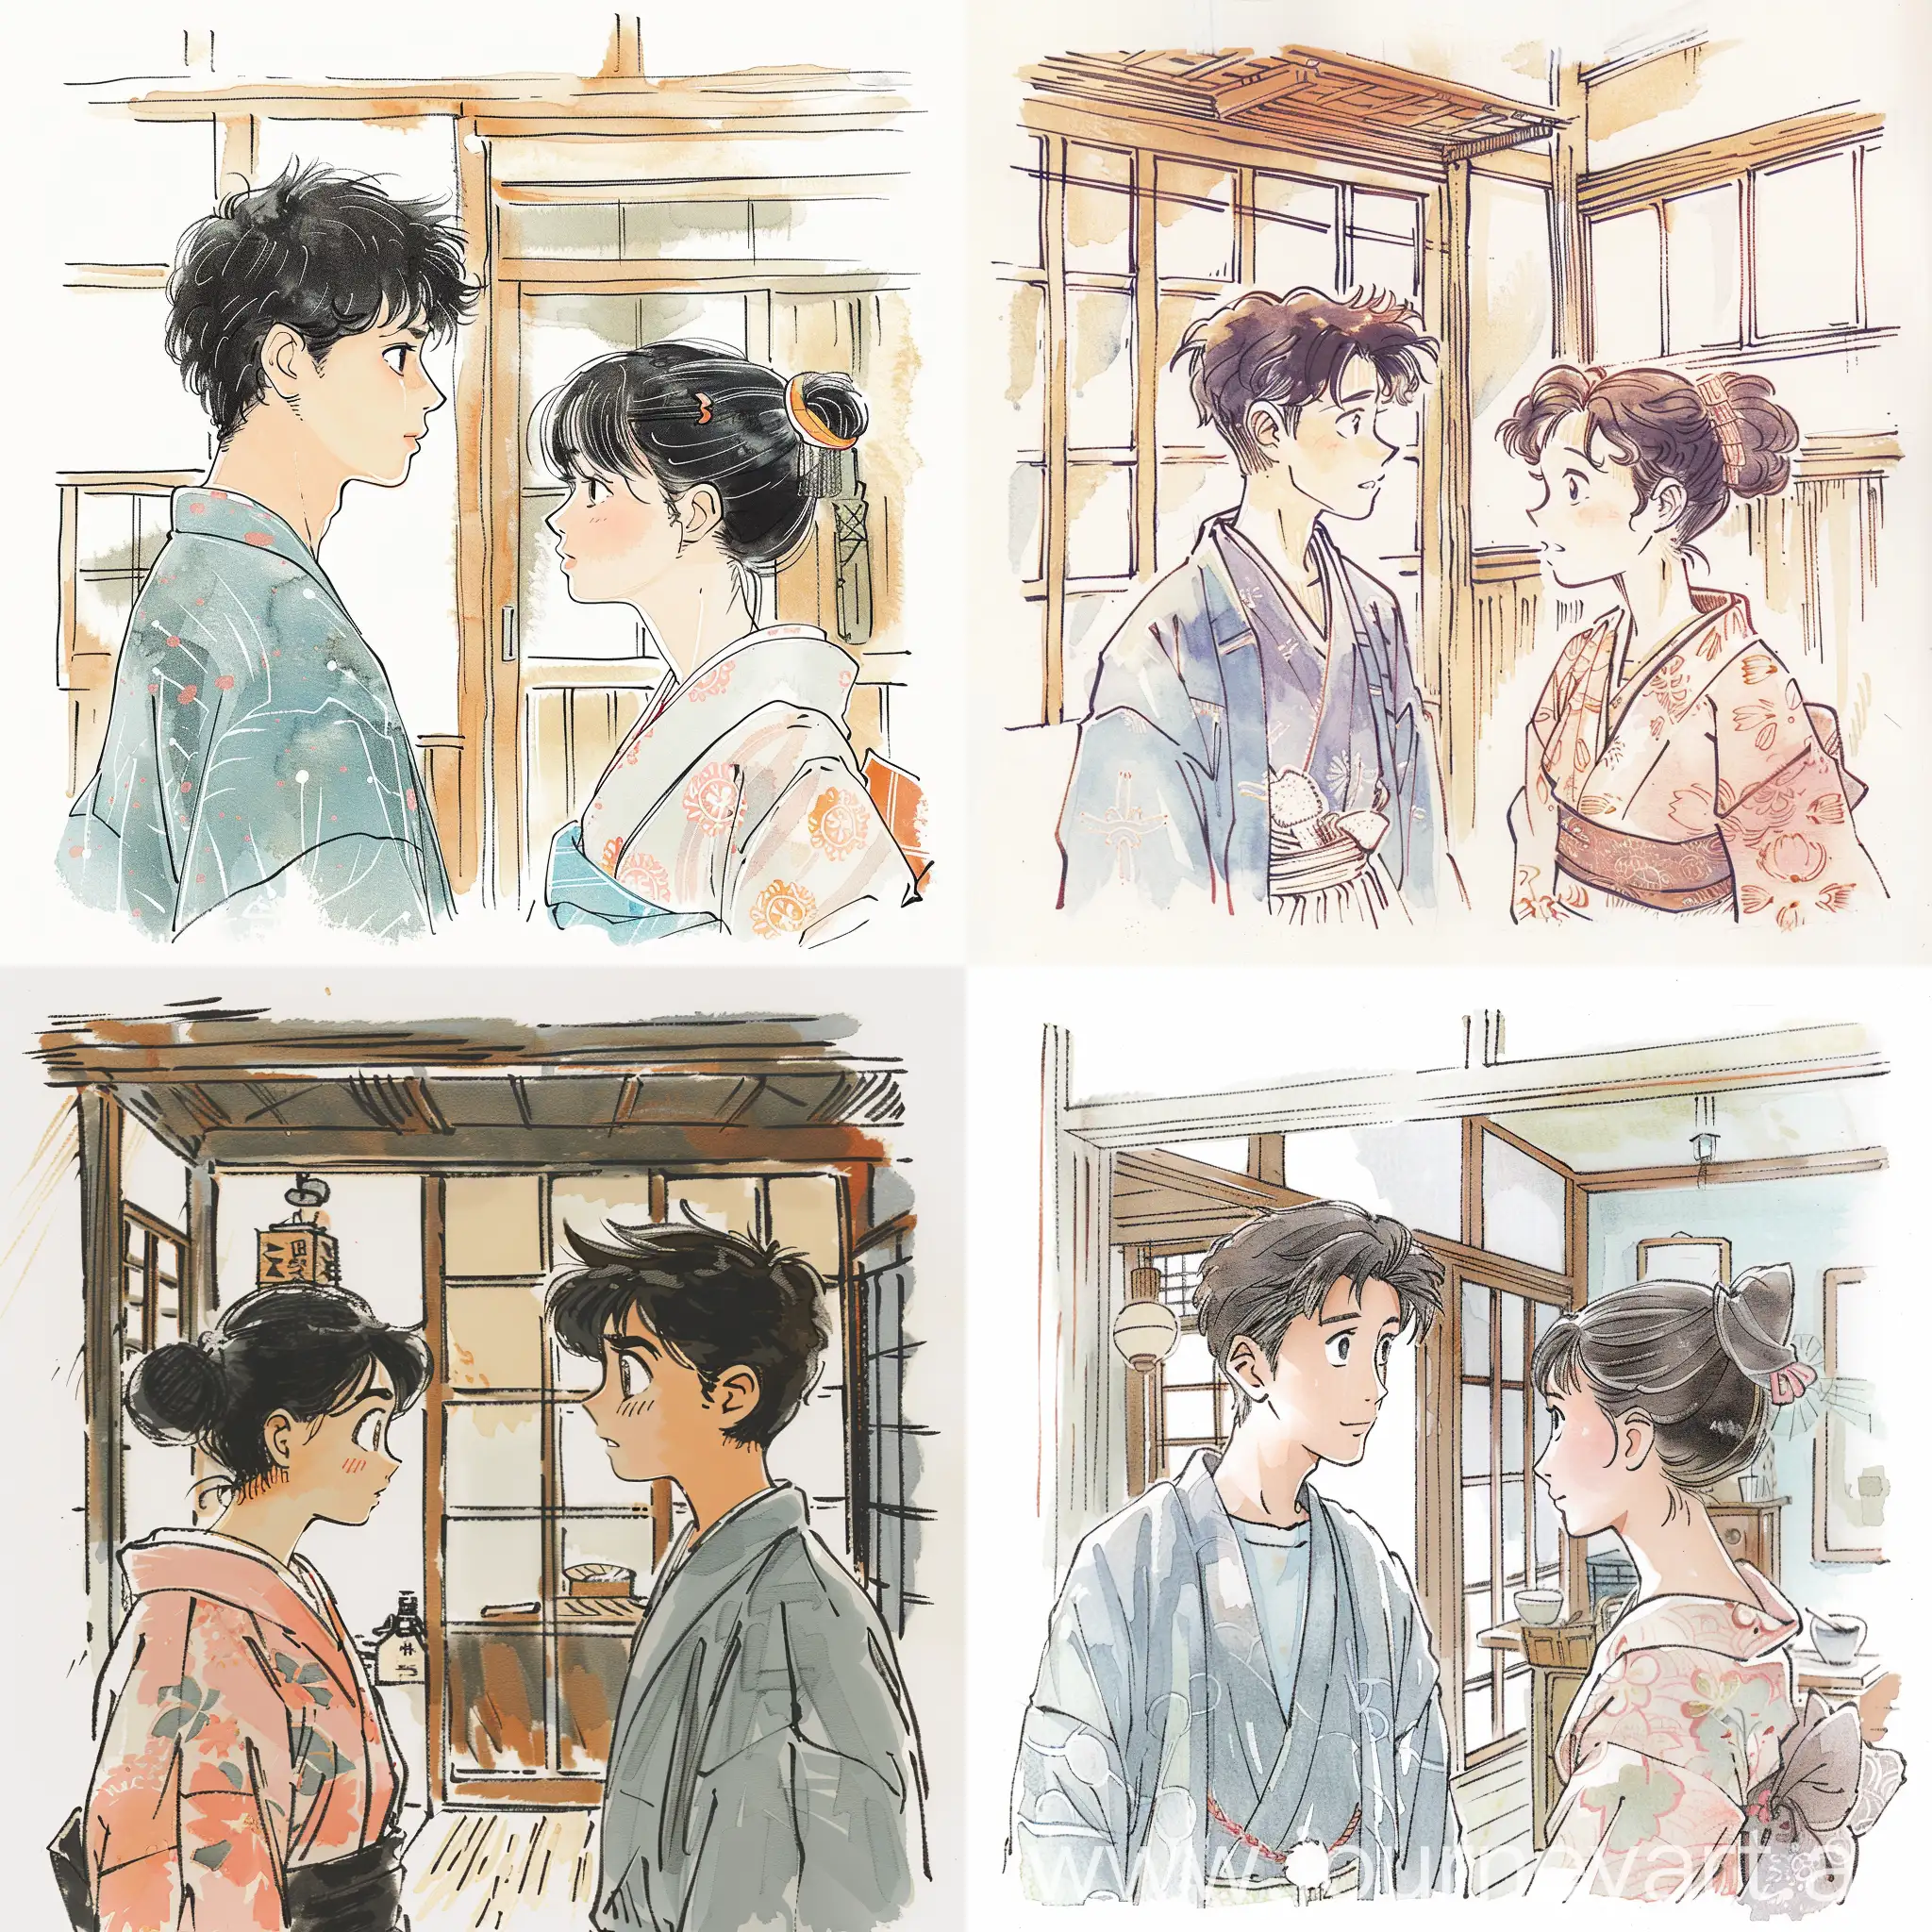 A storybook illustration ((Japan style)) drawing of a young man and servant woman looking at each other in a Edo era Japanese home, on kimono, with simple lines and pastel colors on a white background. It's full color with sharp outlines in a simple, cute style that looks like it was drawn in watercolor. 